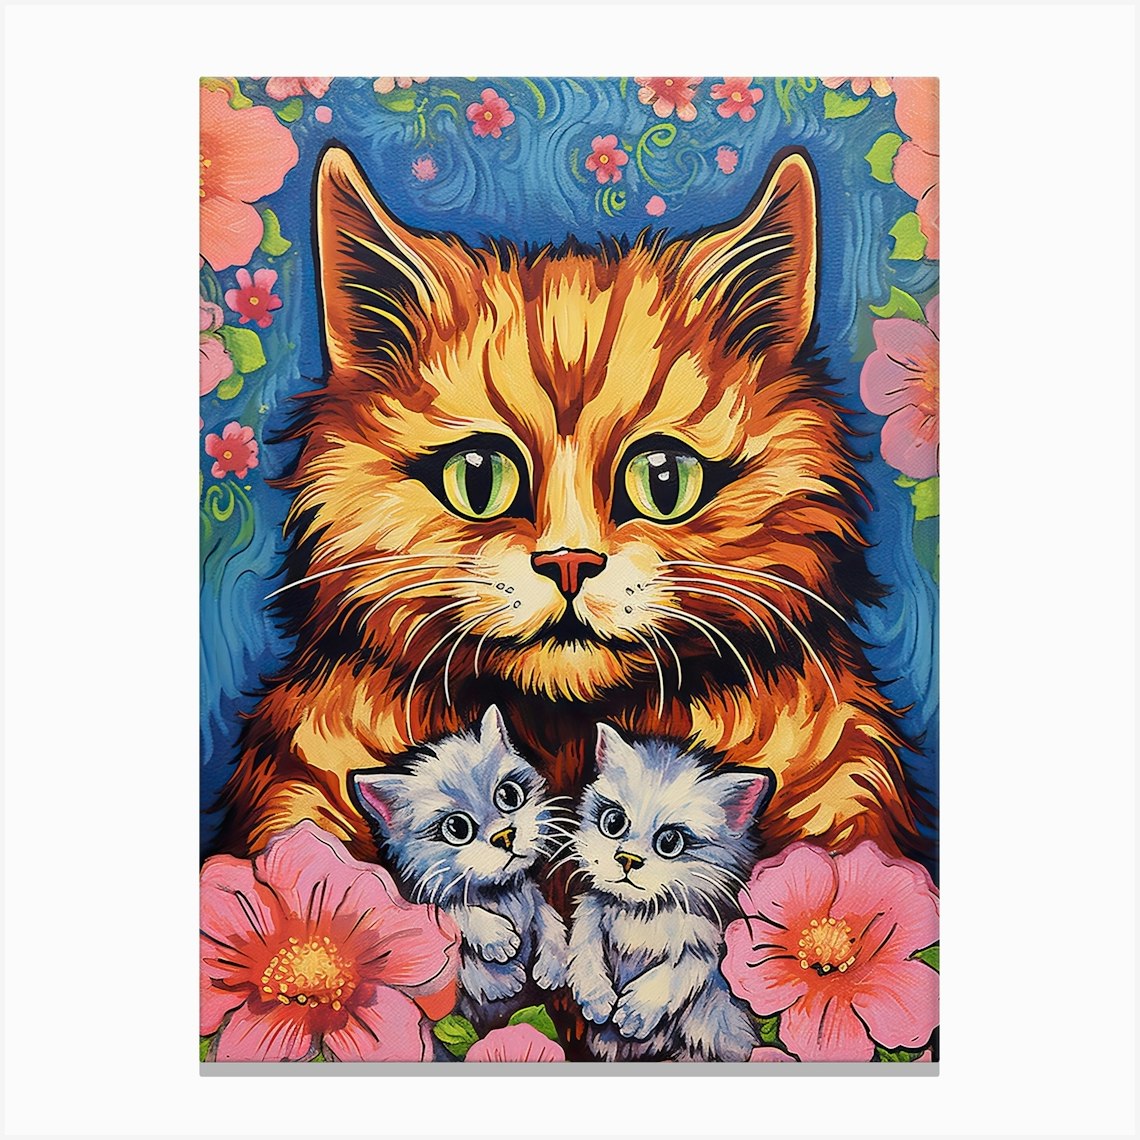  A Cat In The Gothic Style By Louis Wain Poster Canvas